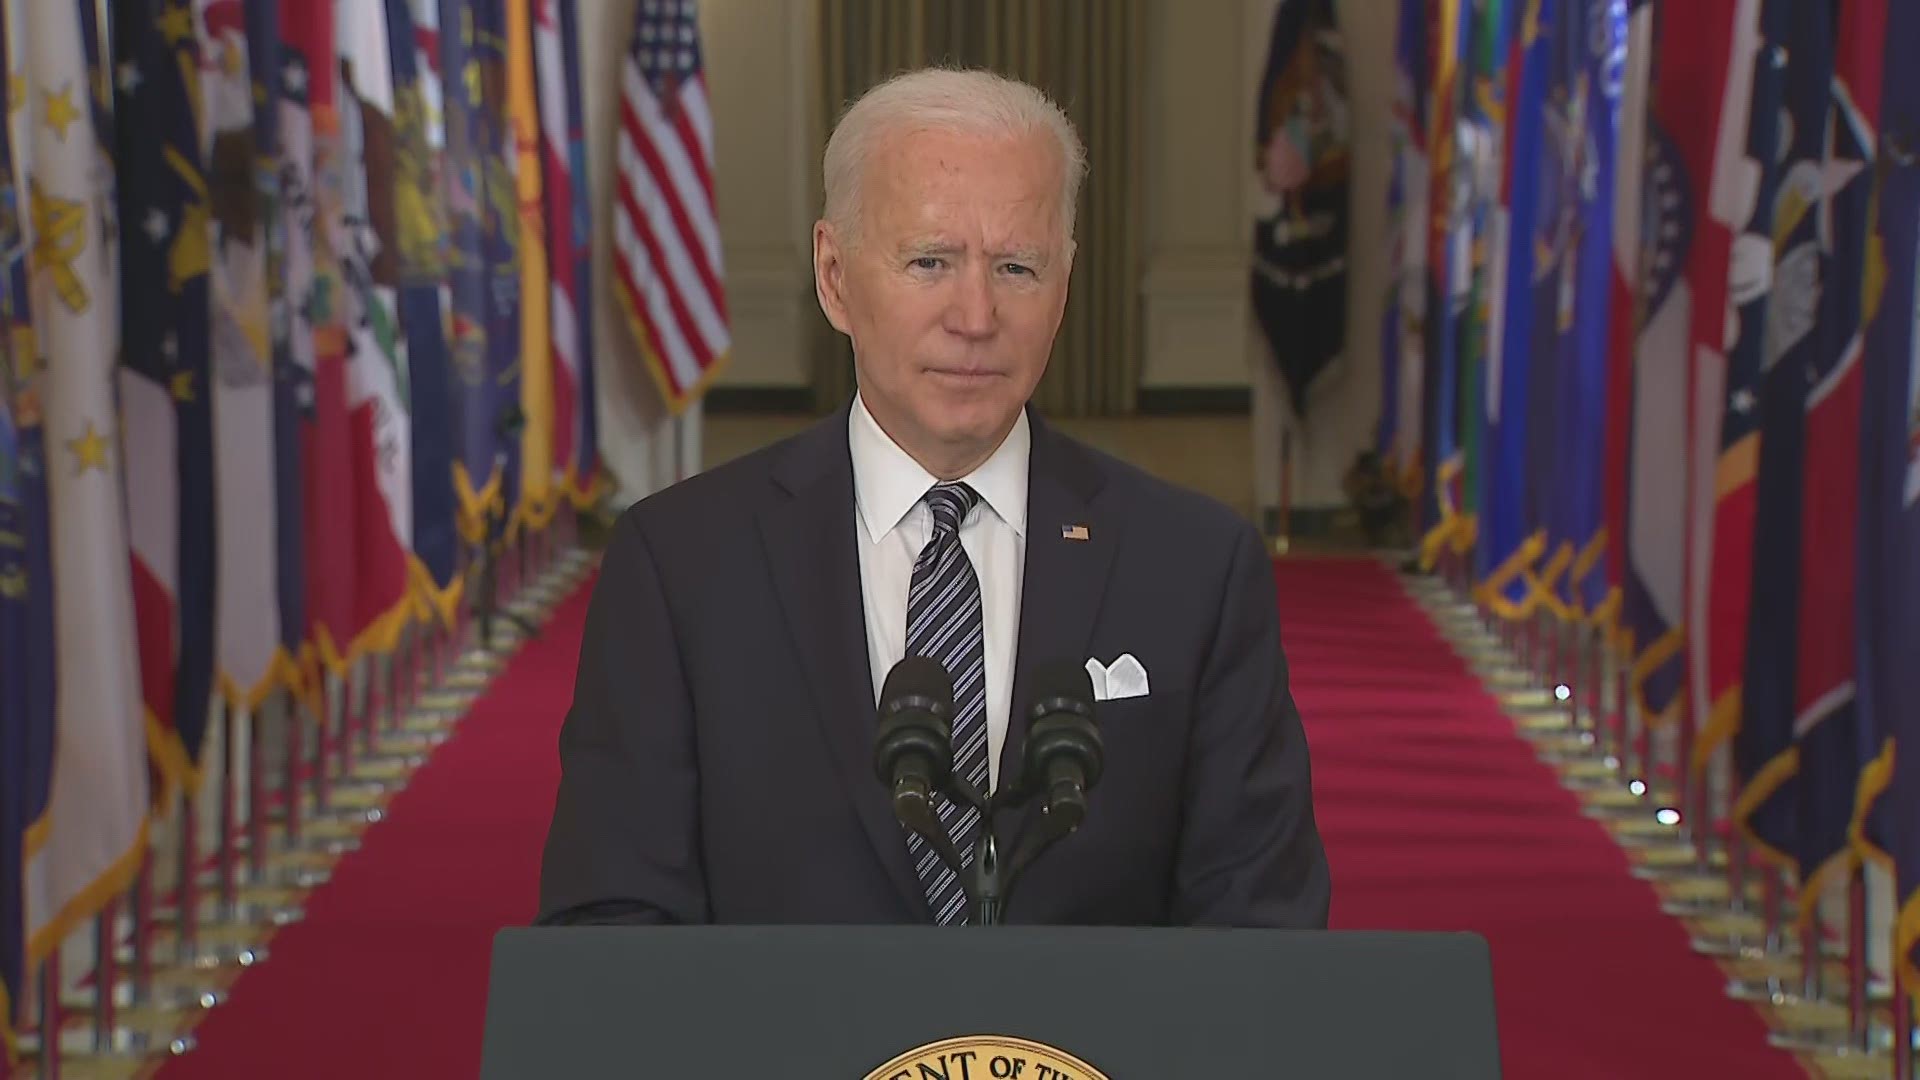 President Joe Biden announced Thursday that he is directing states to ensure that all adults will be eligible to get the COVID vaccine by May 1.